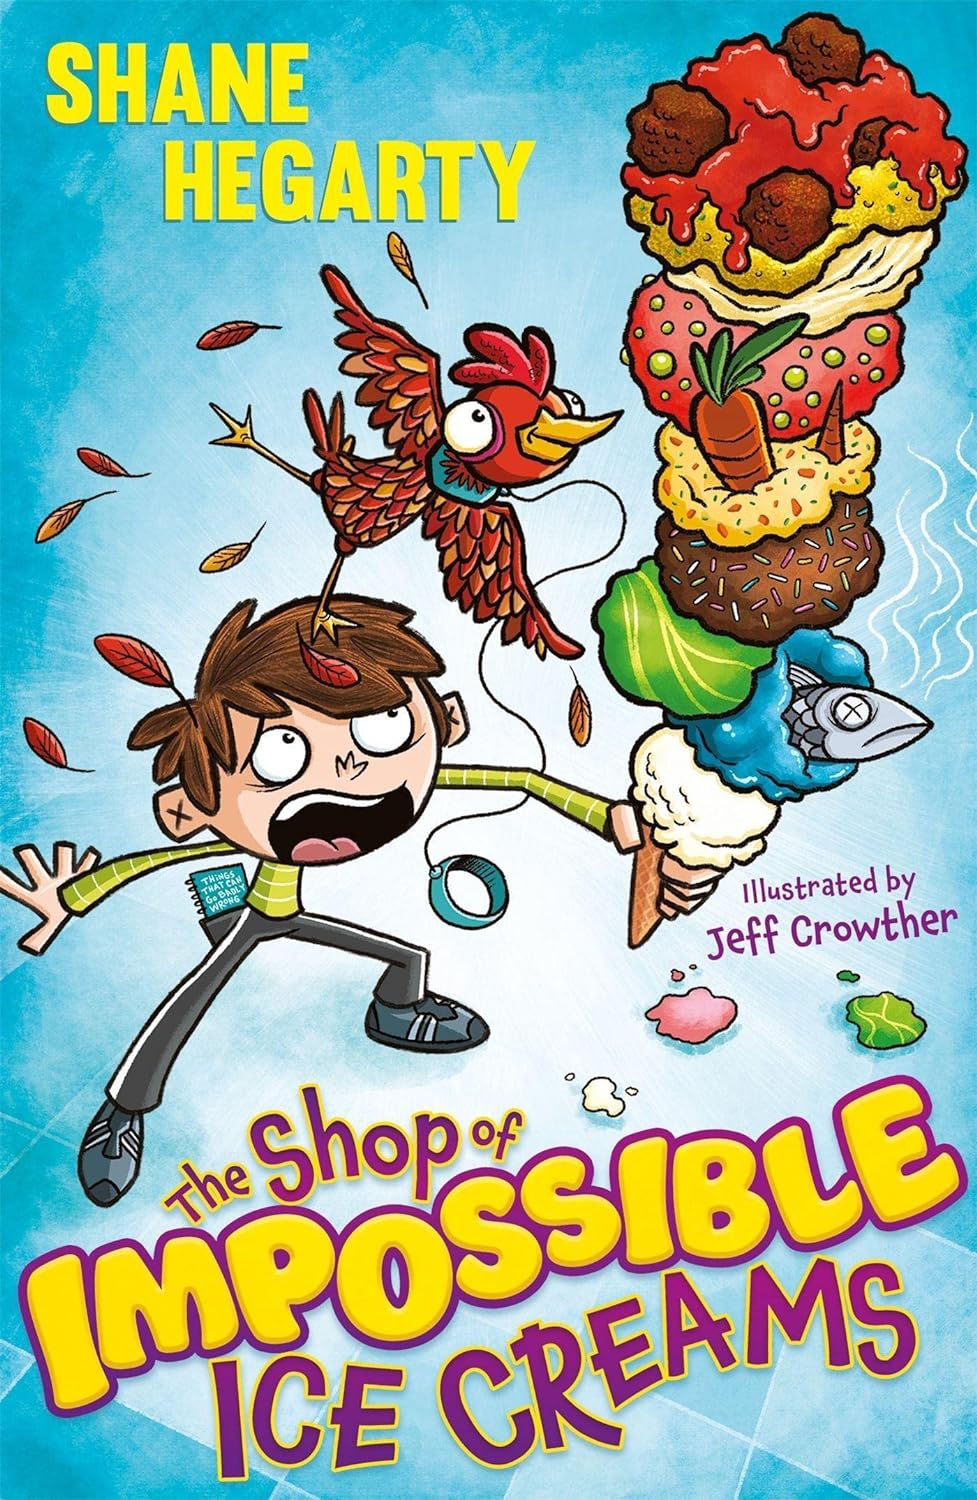 Book cover for The Shop of Impossible Ice Creams by Shane Hegarty (illustrated by Jeff Crowther)